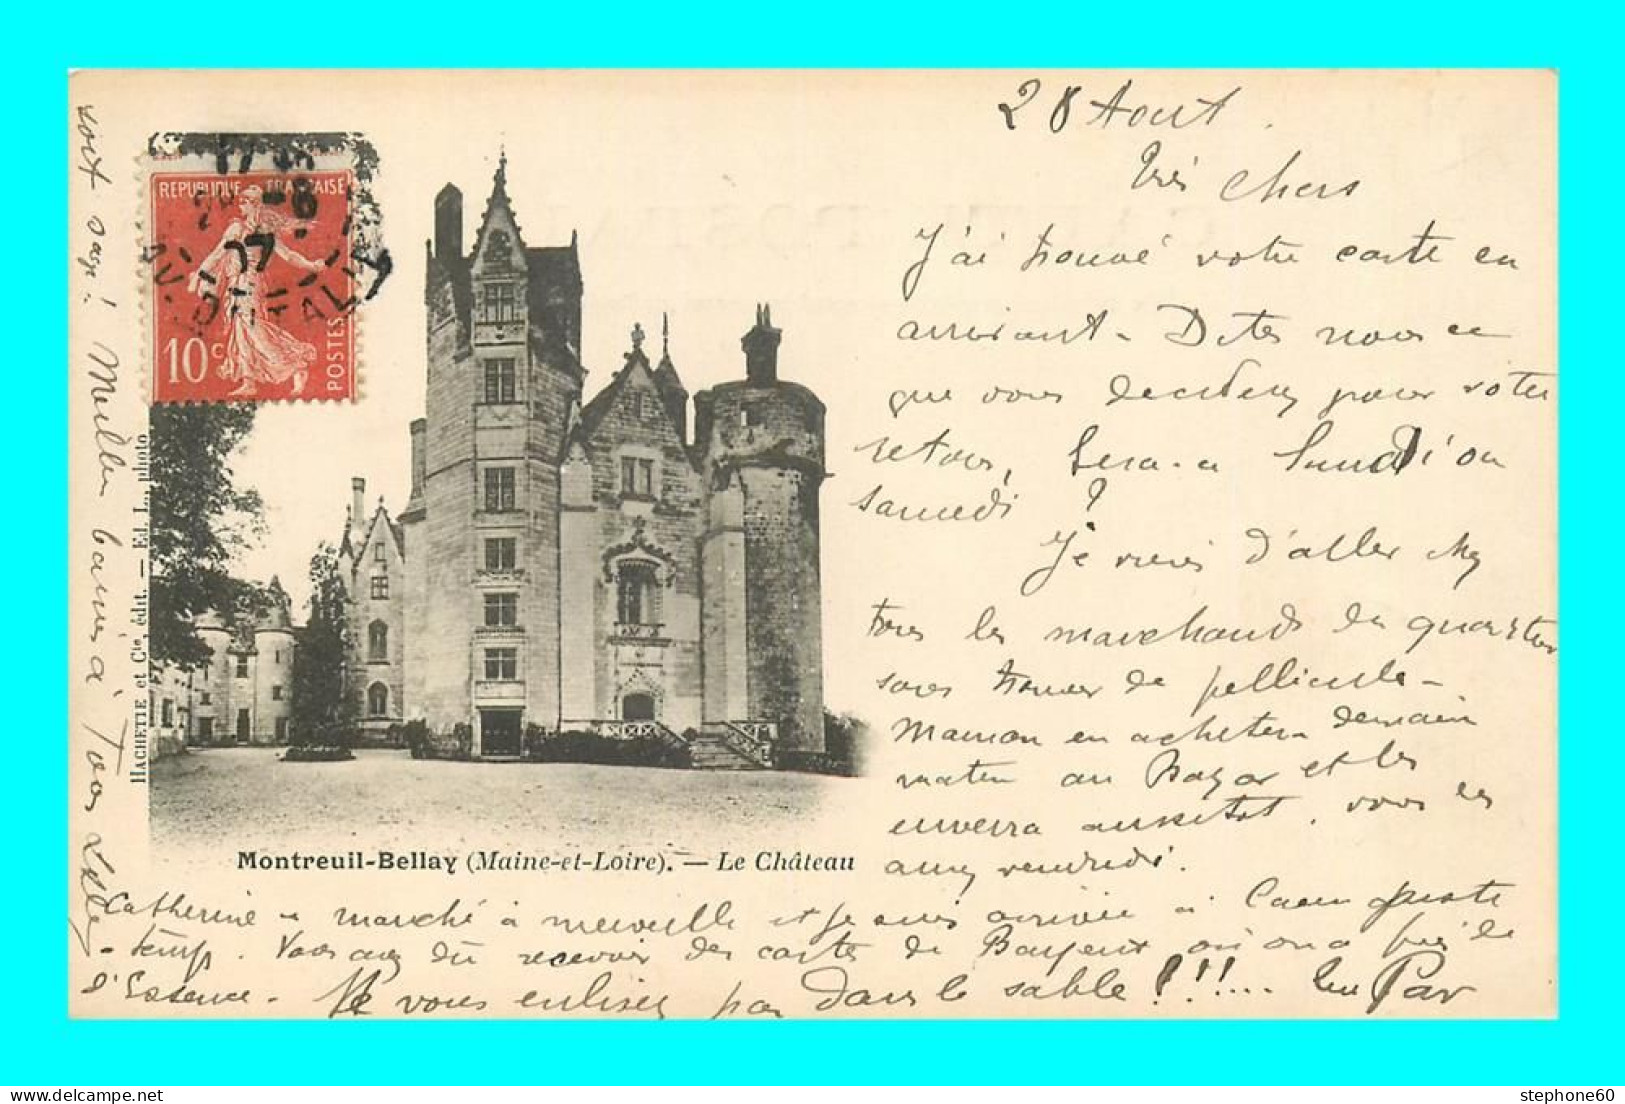 A897 / 189 49 - MONTREUIL BELLAY Chateau - Montreuil Bellay